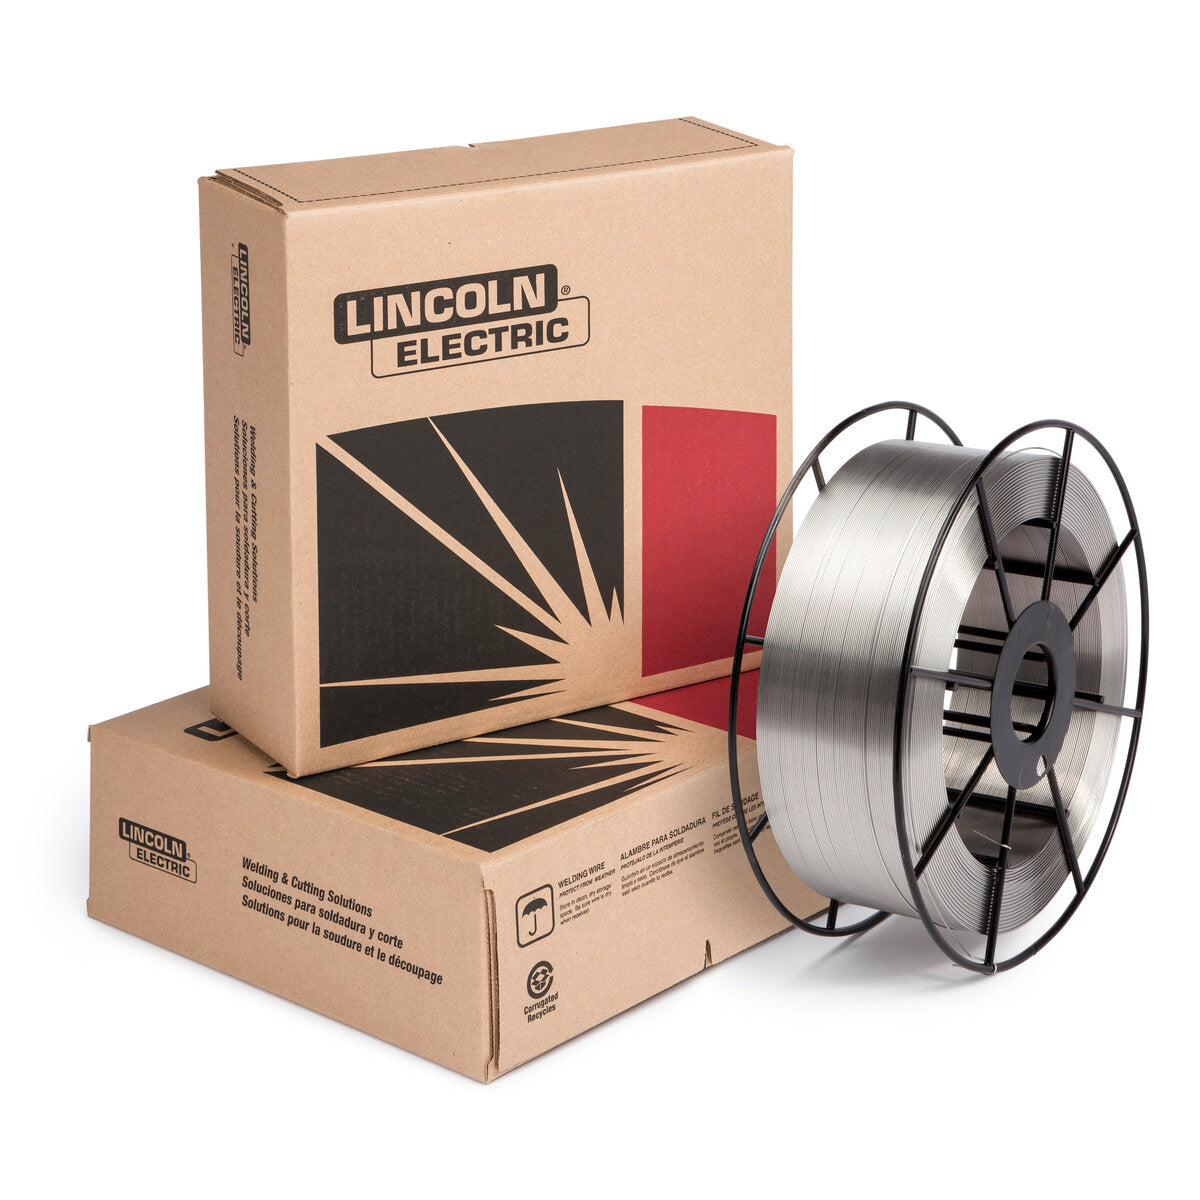 Lincoln Electric - Techalloy® 617 MIG (GMAW) Wire, 1/16 in, 33 lb Spool - MG617062667